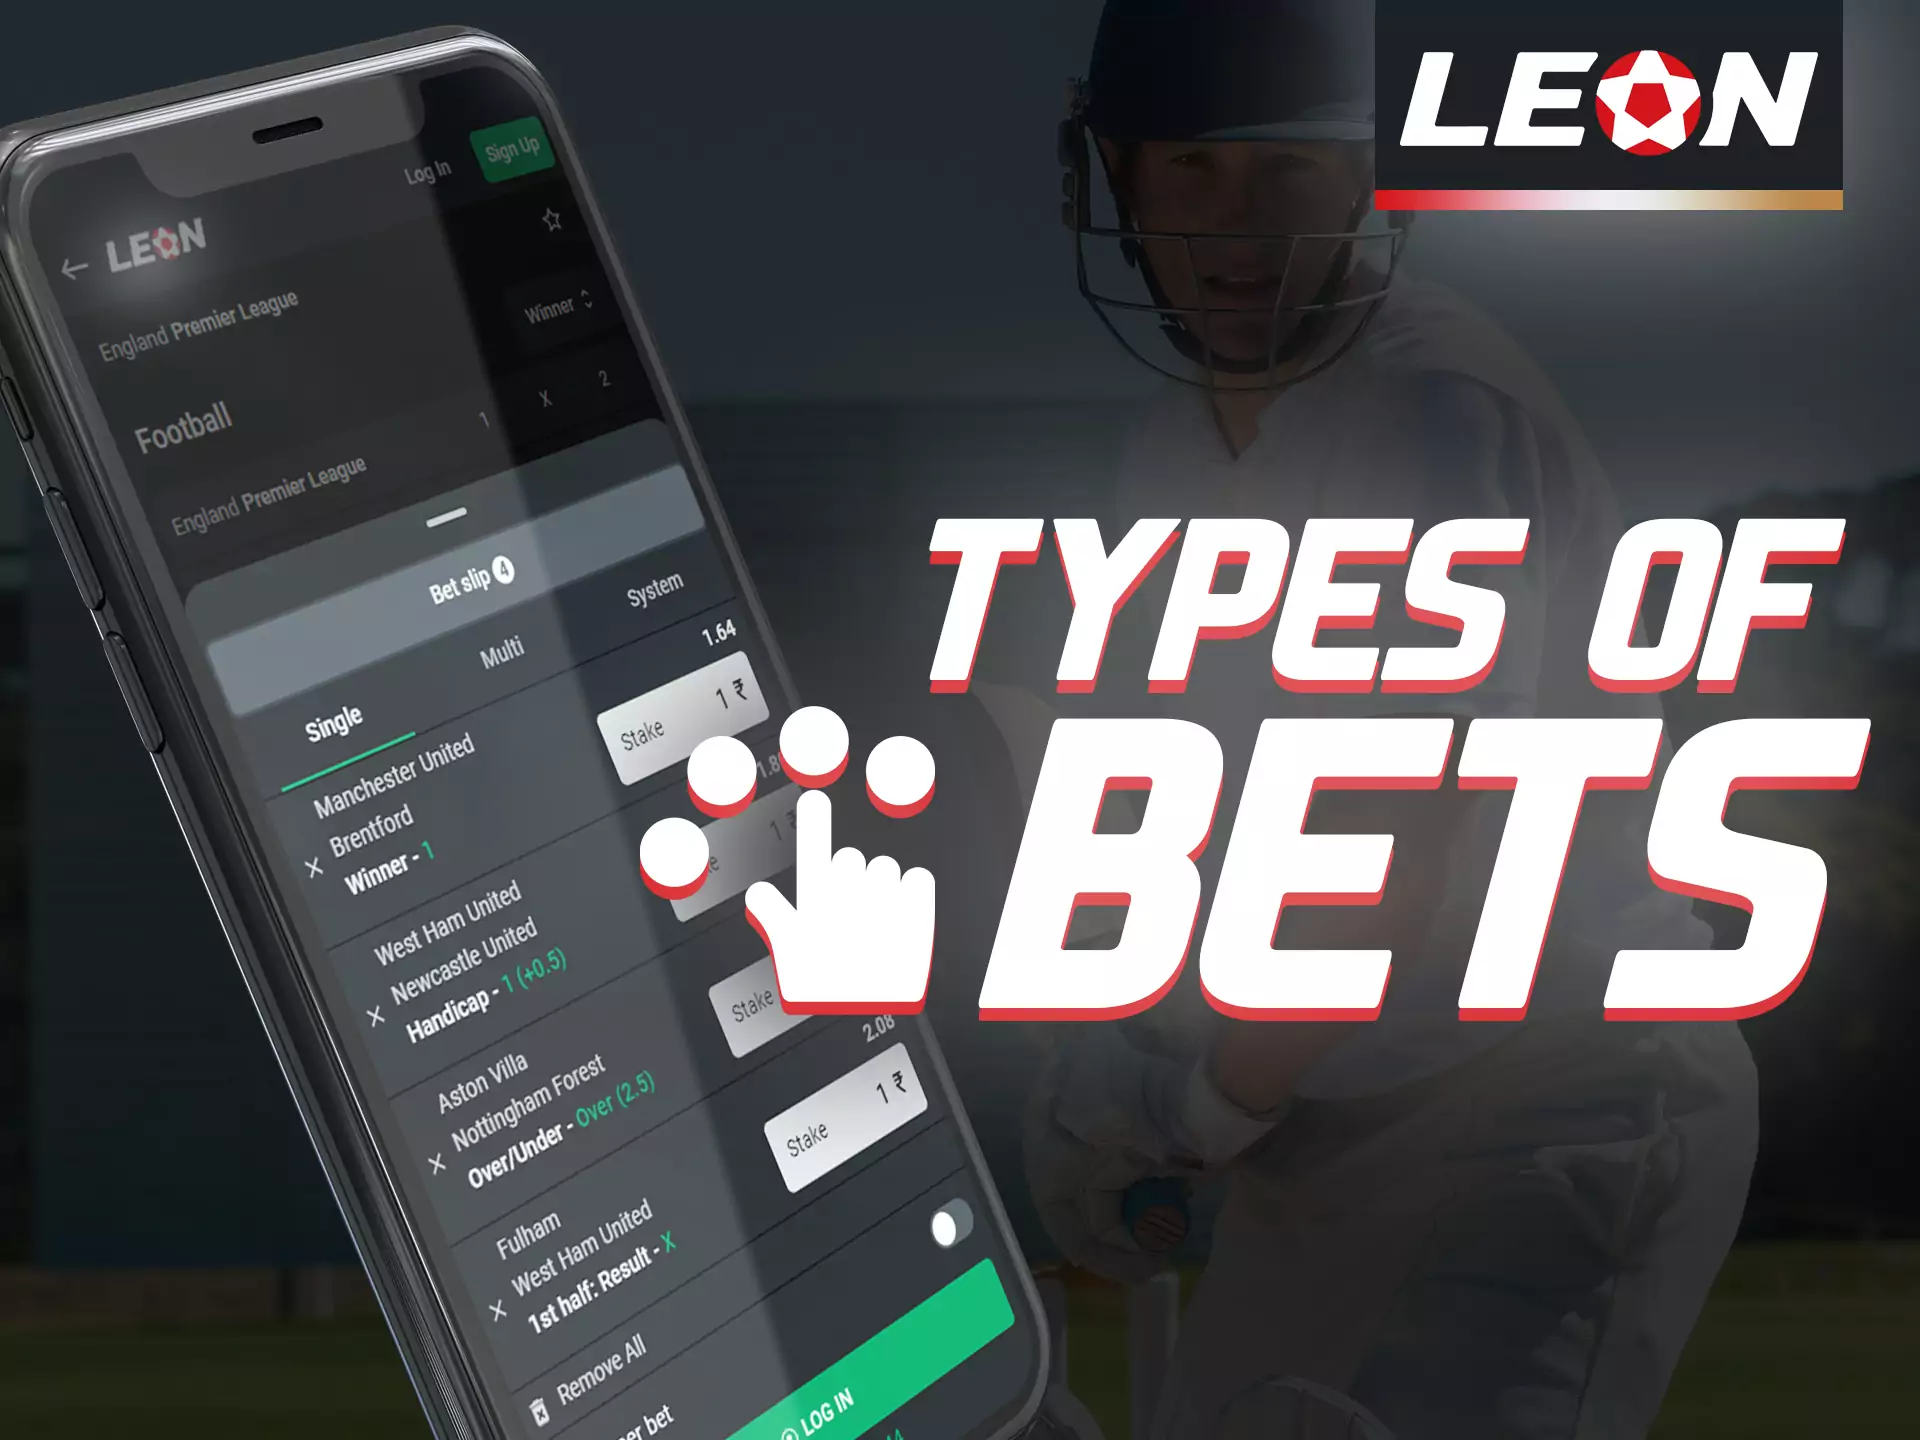 There are different types of bets available on the Leonbet app.